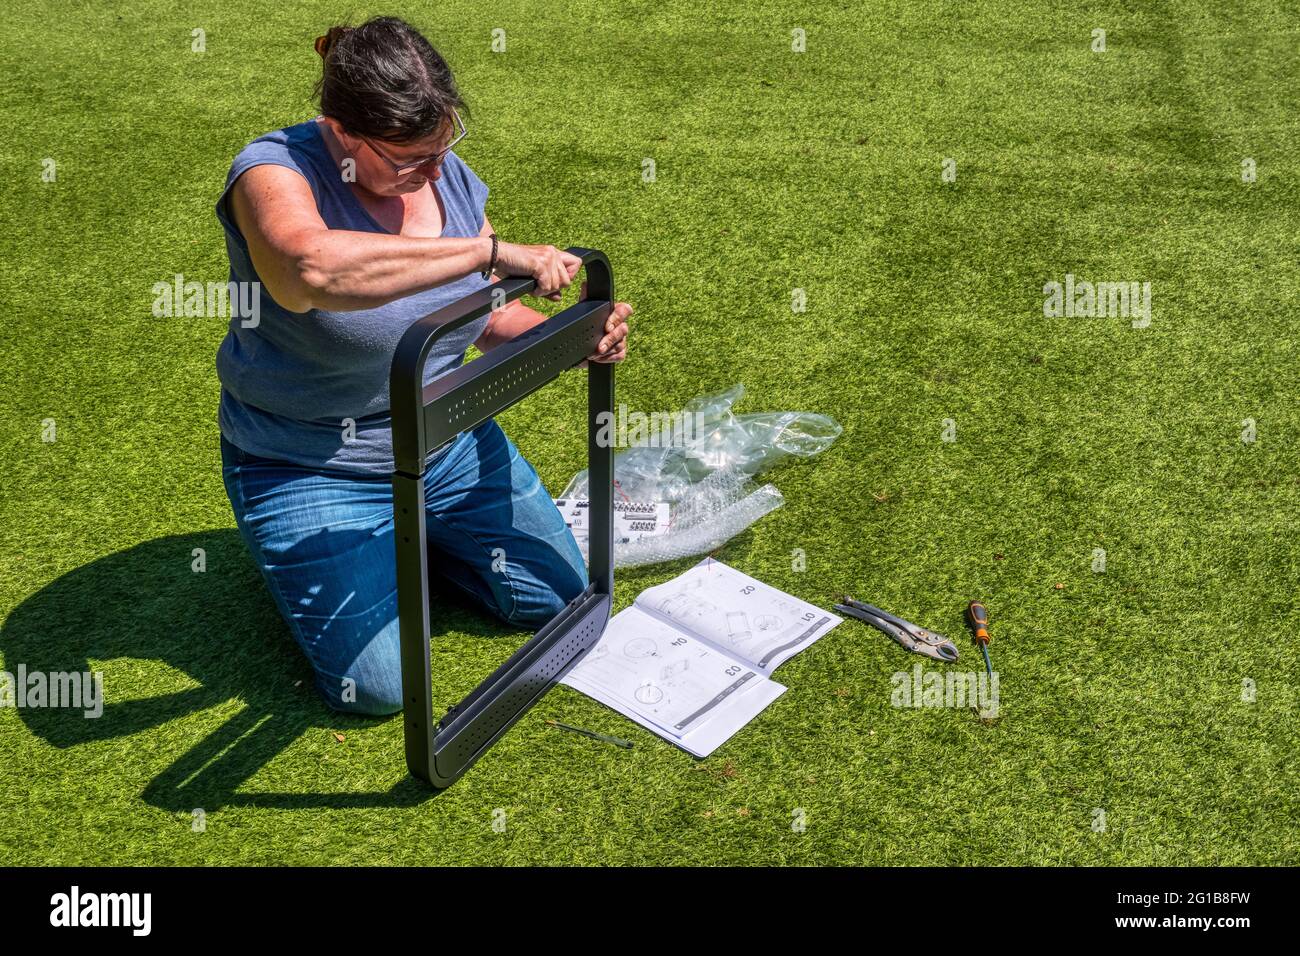 Woman building a self-assembly barbecue outside with tools and set of instructions. Stock Photo